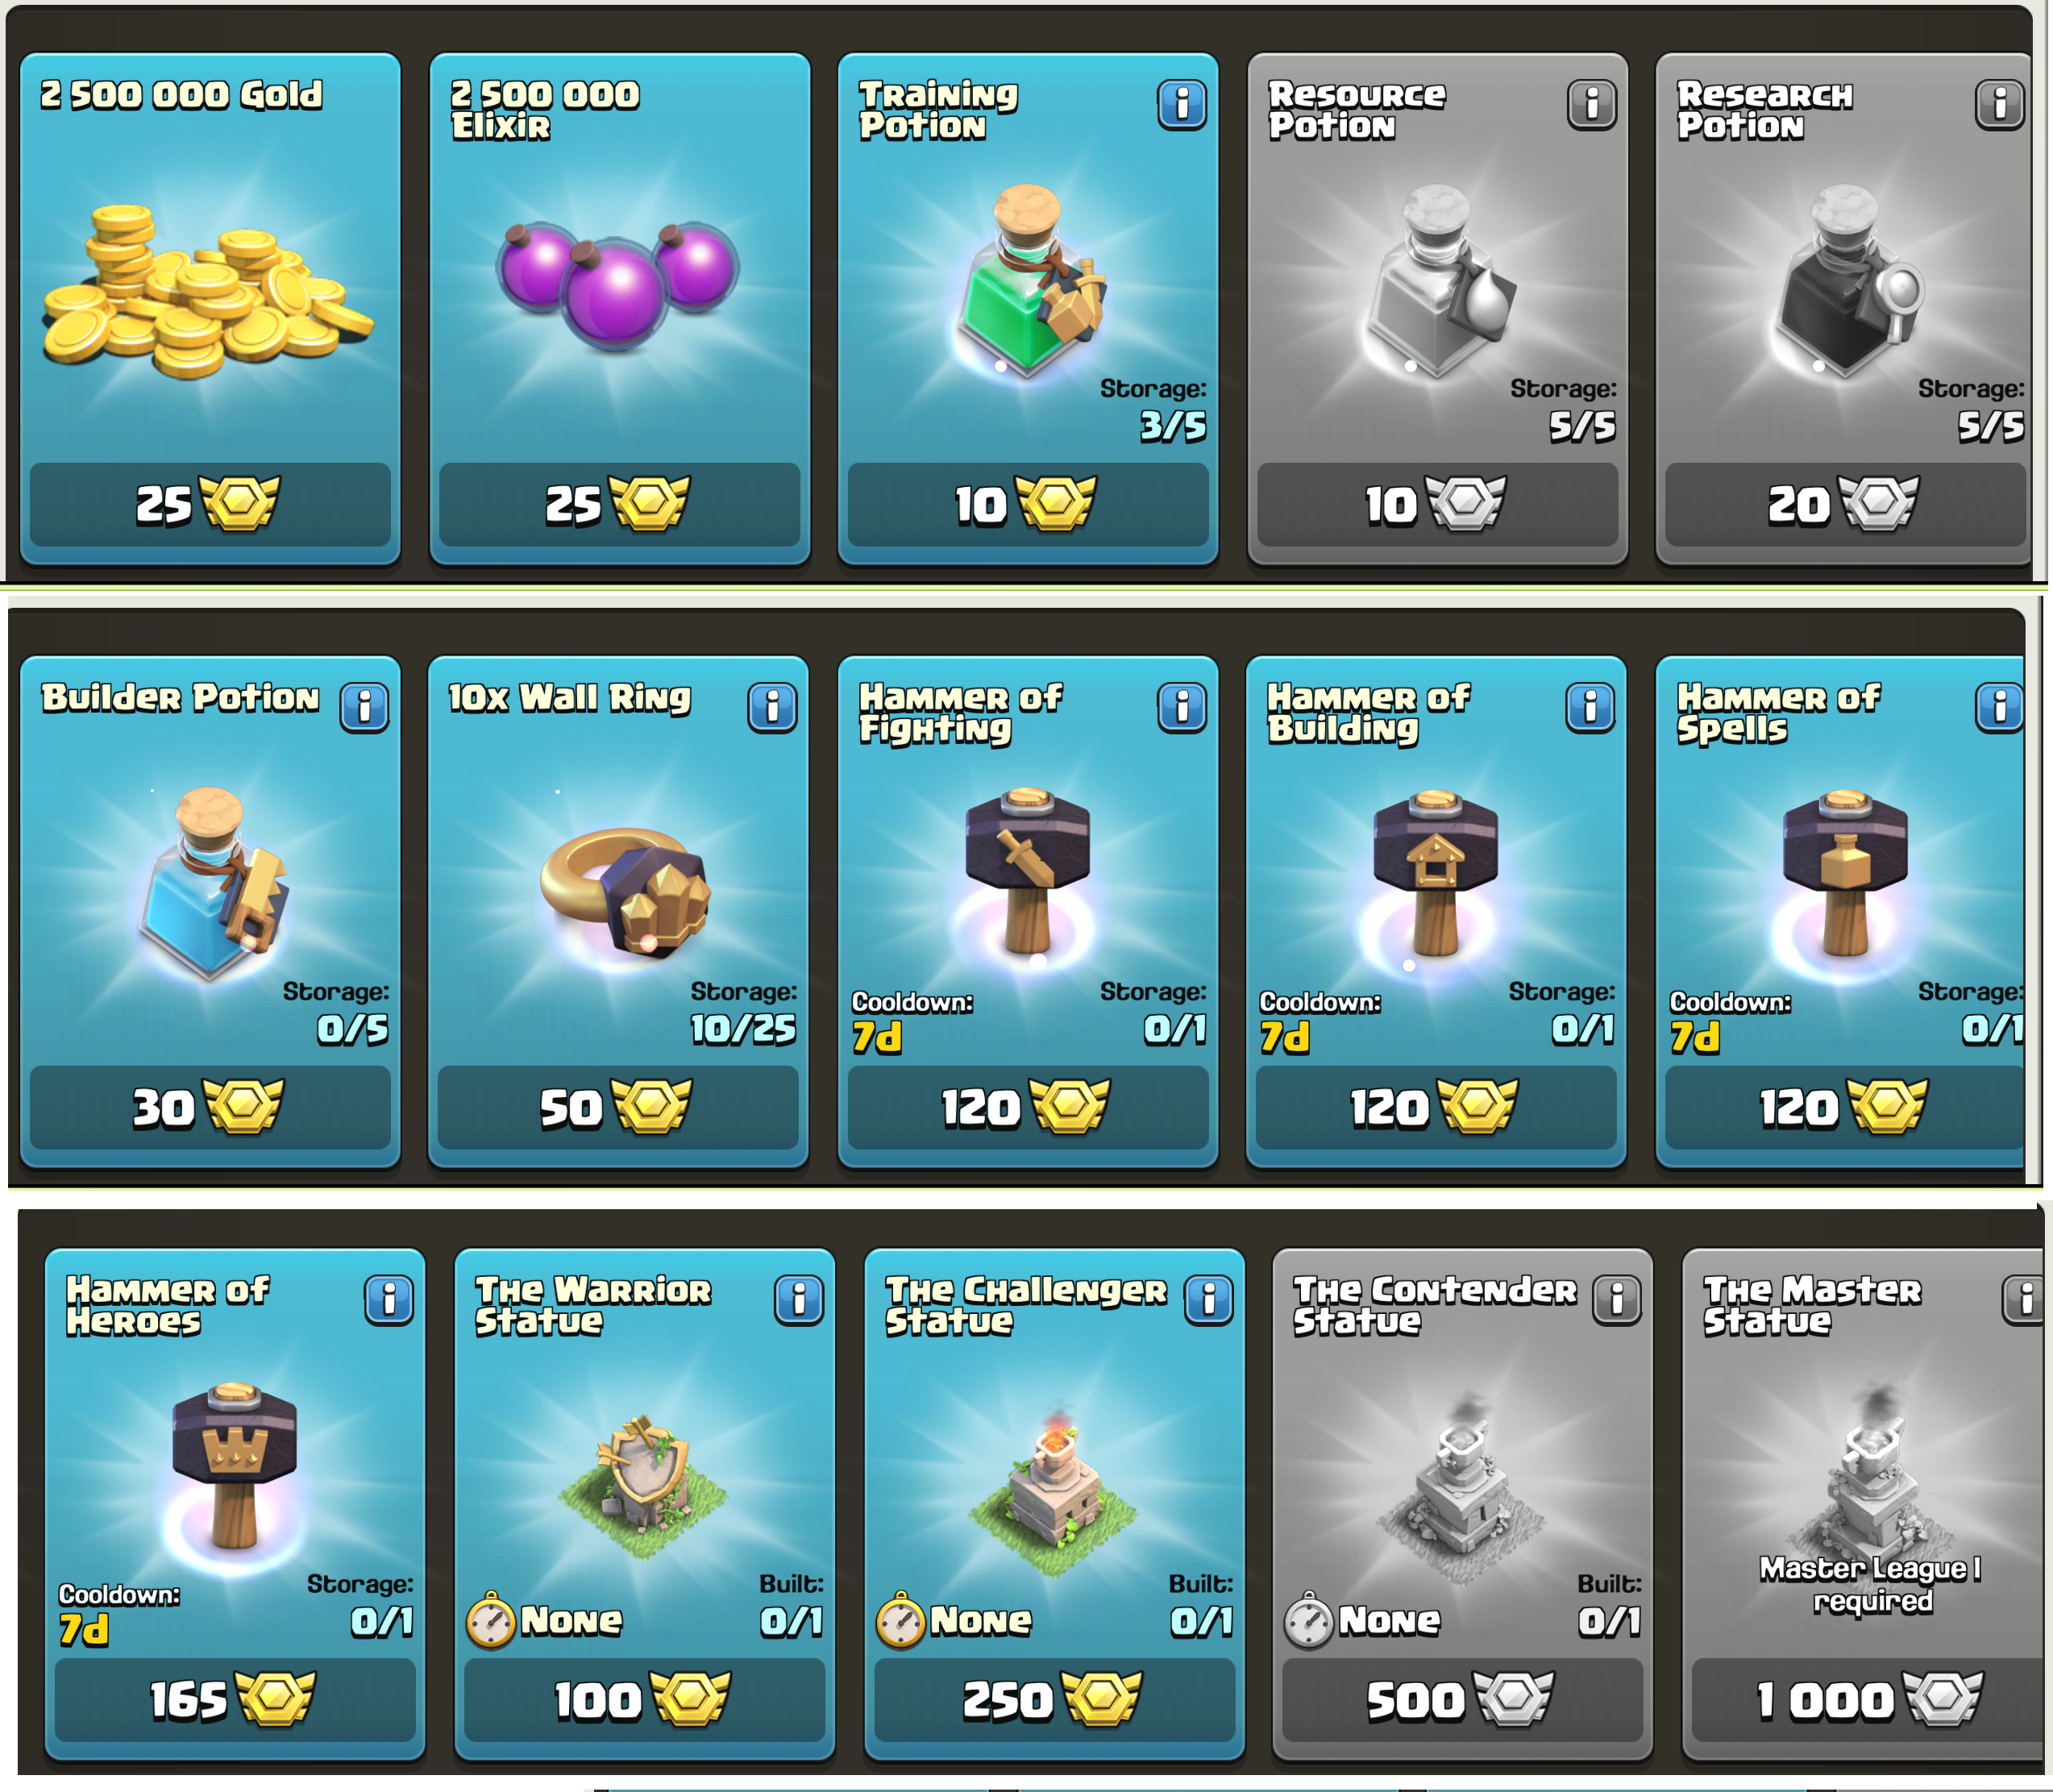 Learn How to Get Free Gems in Clash of Clans